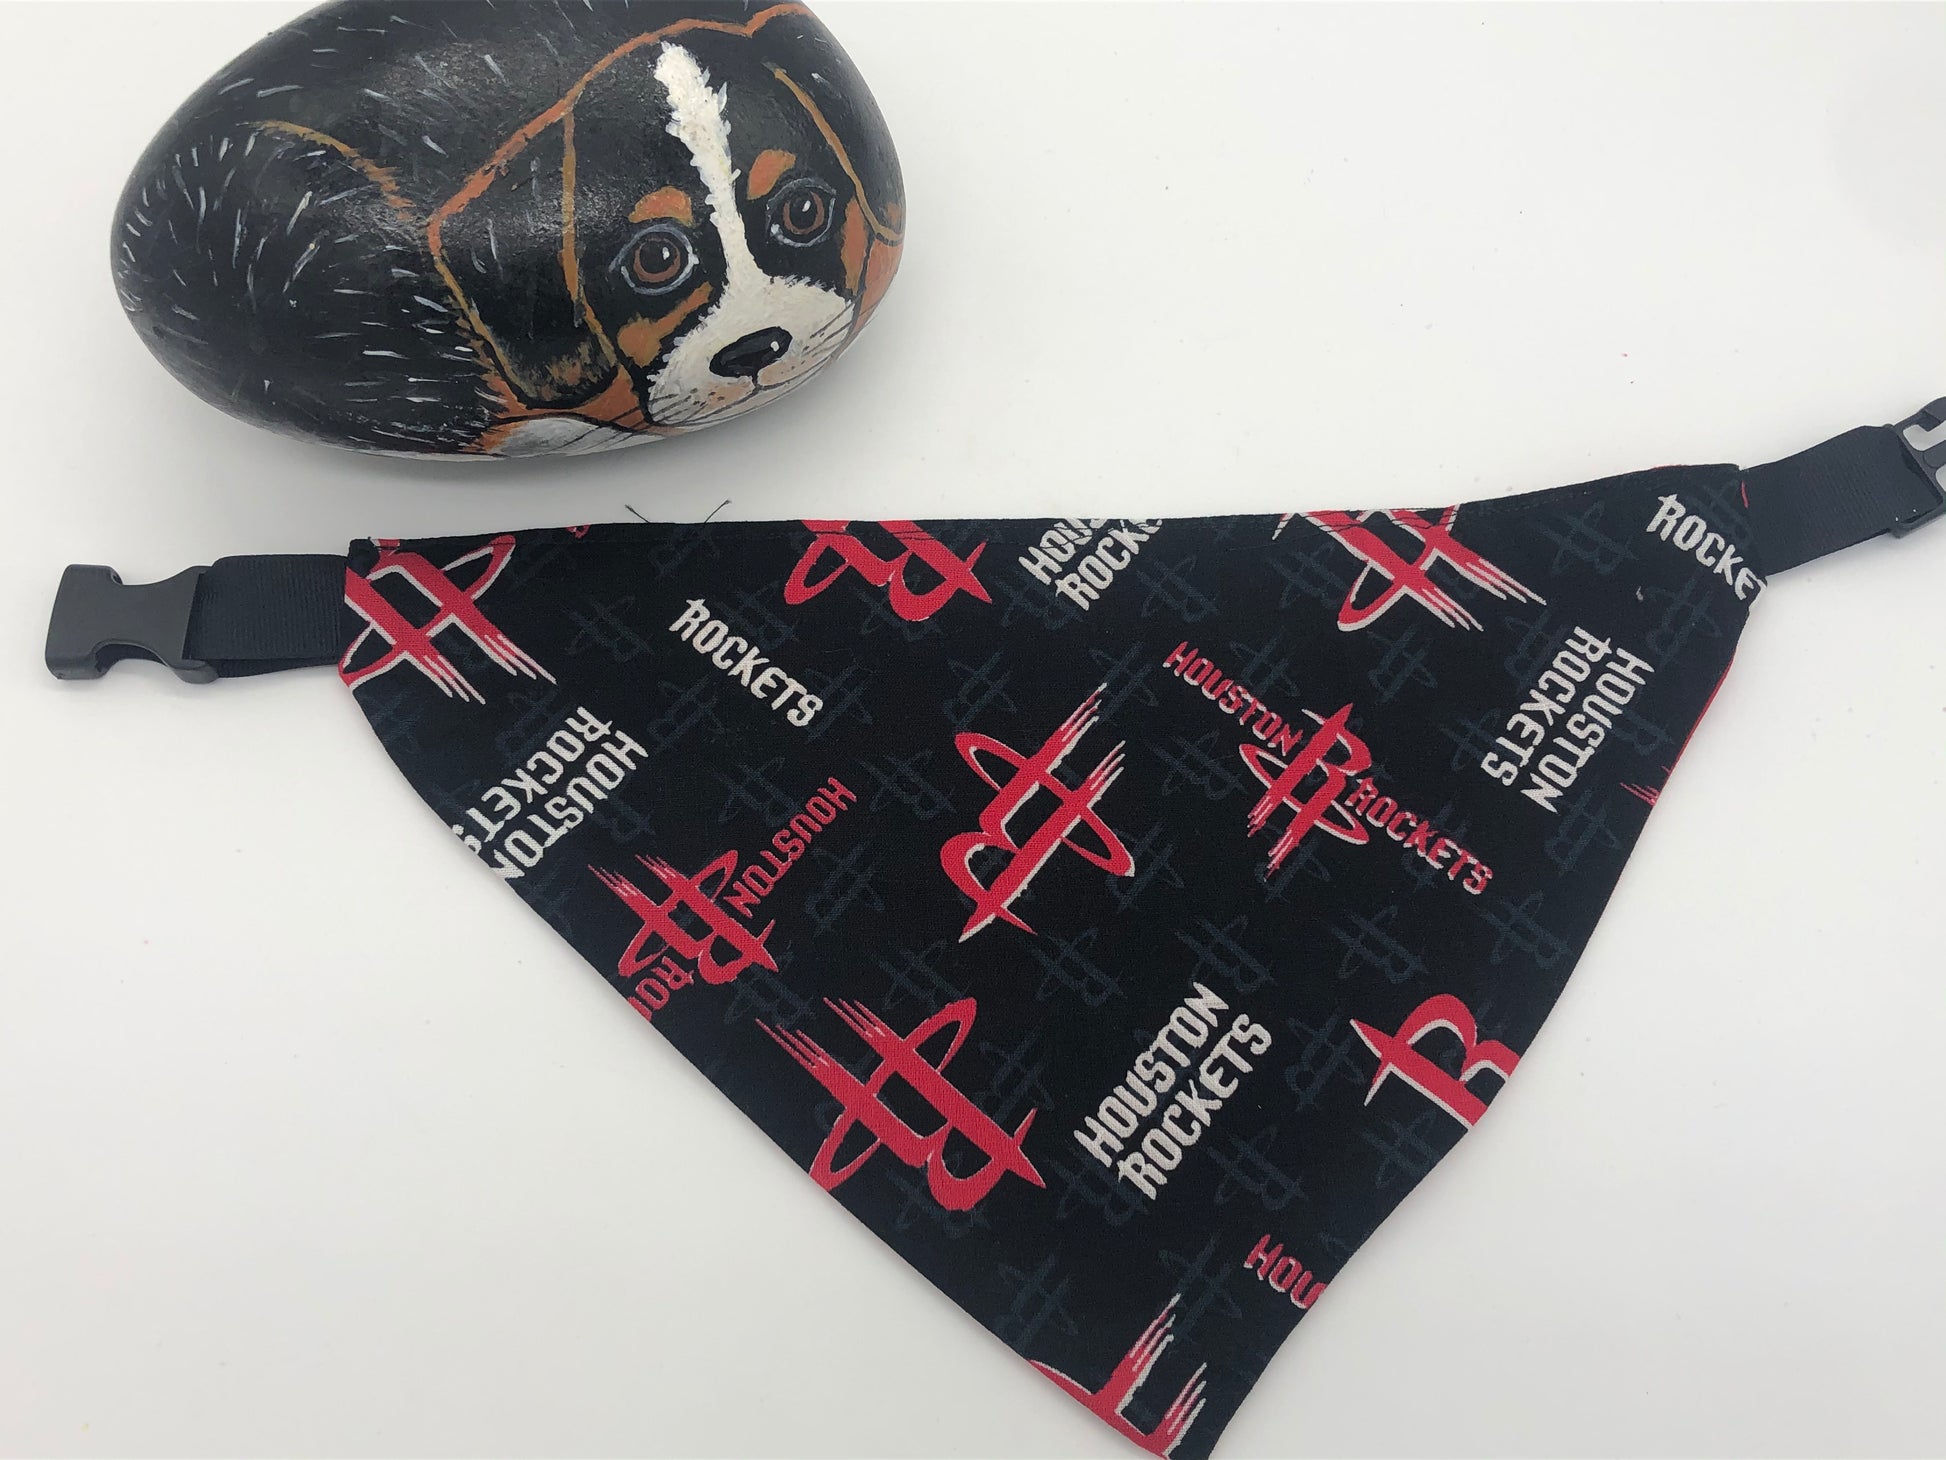 Decorative rock painted like a small curled up black and tan dog next to a blak Houston Rockets triangular dog bandana with black plastic closure.  Bandana is primarily black with red Rockets logo and Houston Rockets written in white.